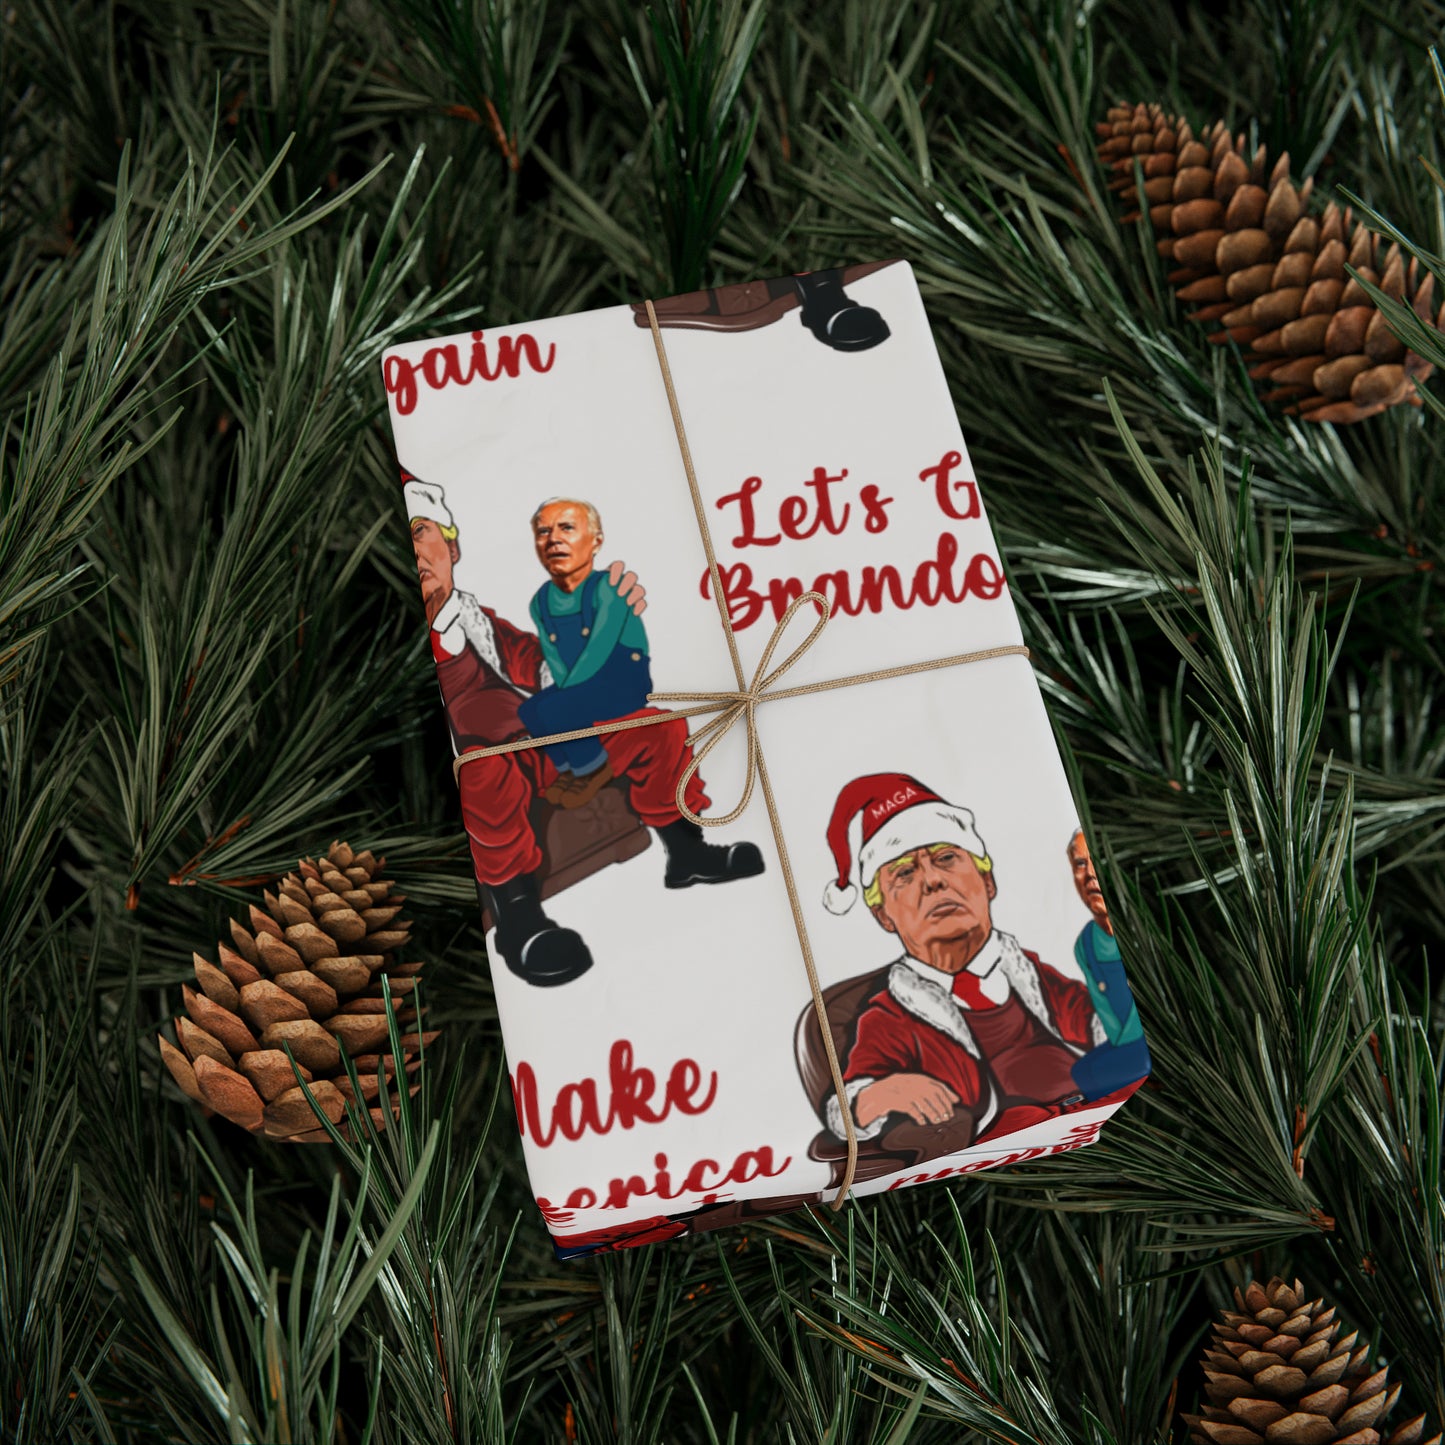 Greatest Trump Gift Wrap for Christmas - Let's Go Brandon Gift Wrap - Santa Trump Confused Biden Sitting on Lap Gift Wrap